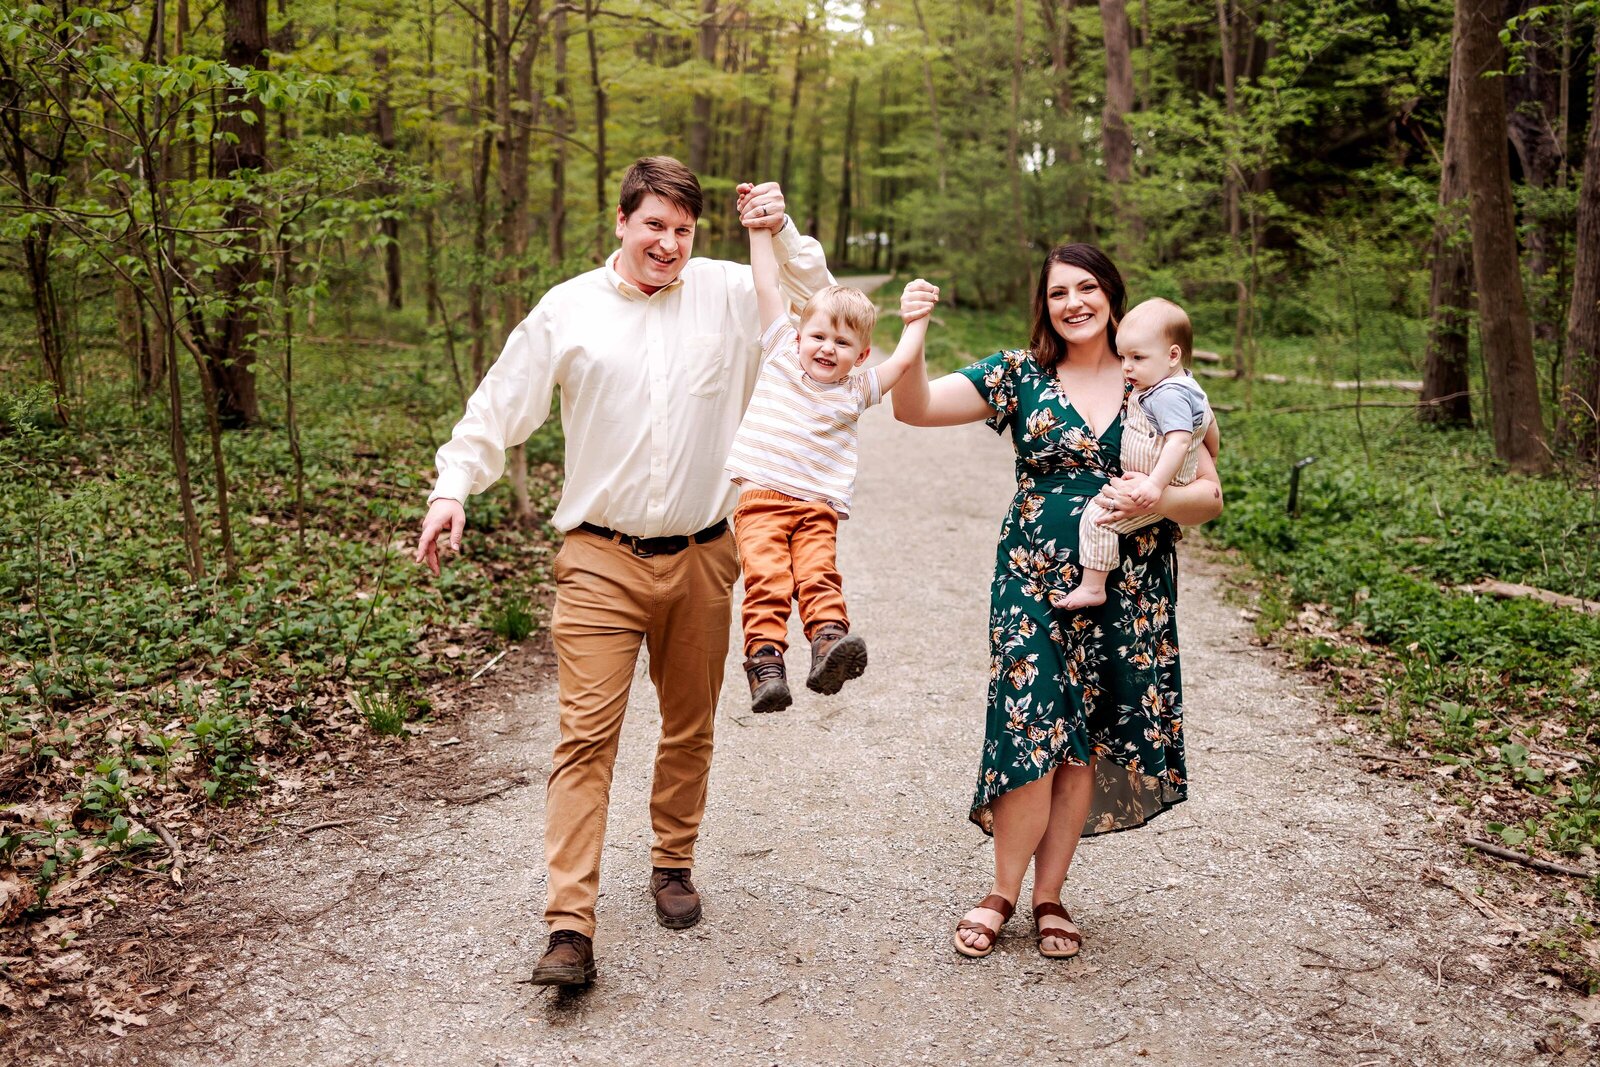 Family swing their toddler forward for a fun photo along a wooded path